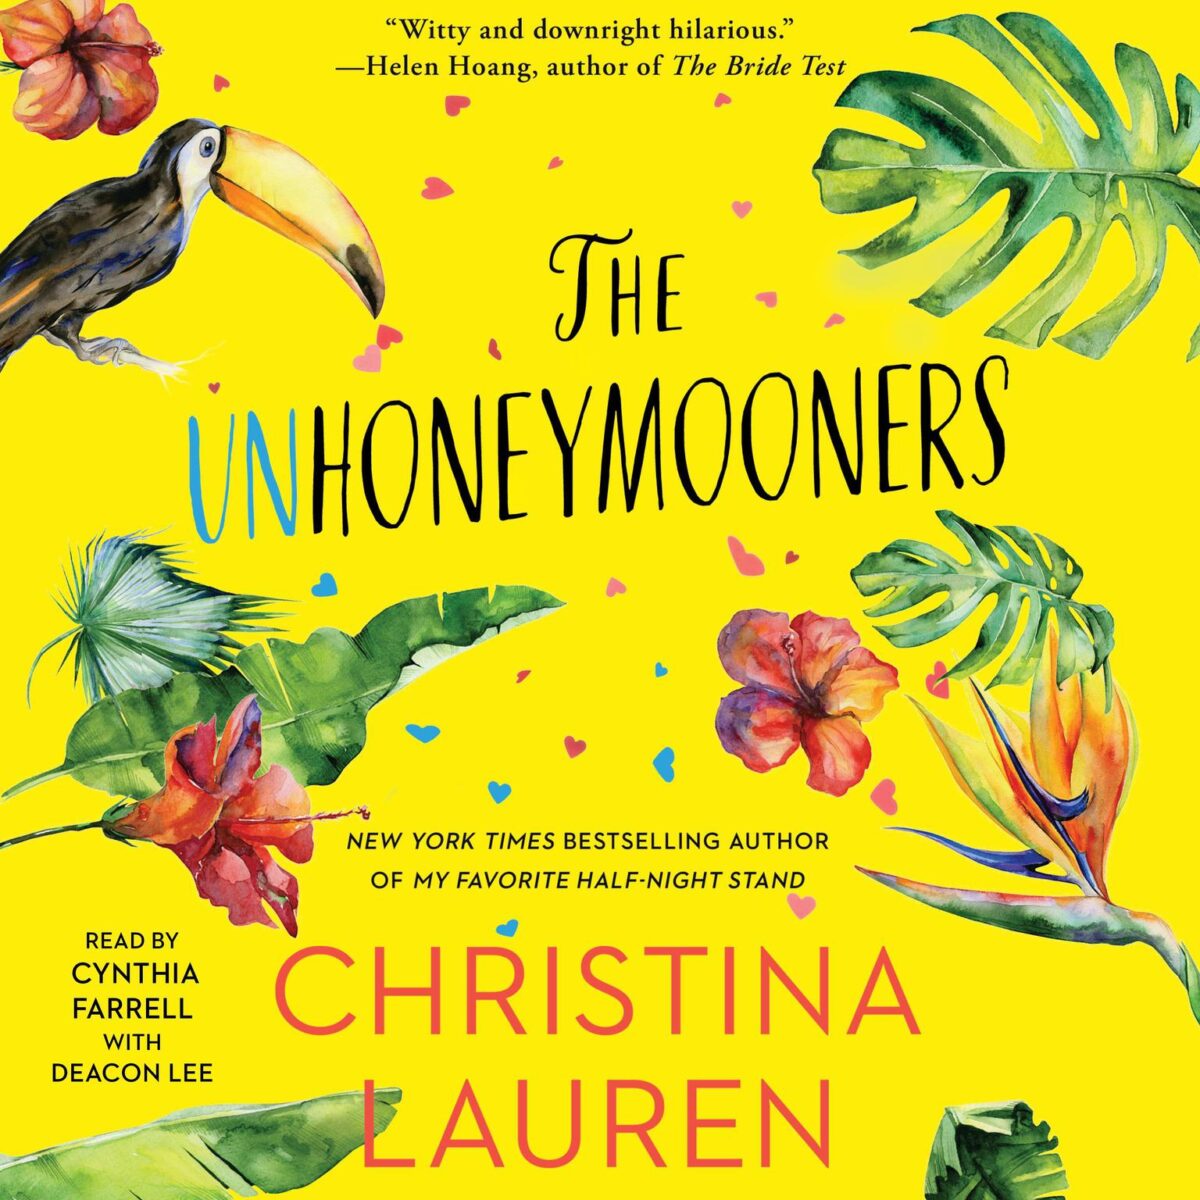 Book cover for "The Unhoneymooners" by Christina Lauren. The cover a bright yellow background with various tropical flora and fauna including a toucan, big green leaves, pink flowers. The text on the cover reads "The Unhoneymooners" "Christina Lauren" the top of the cover contains a review by Helen Hoang that reads "Witty and downright hilarious.”